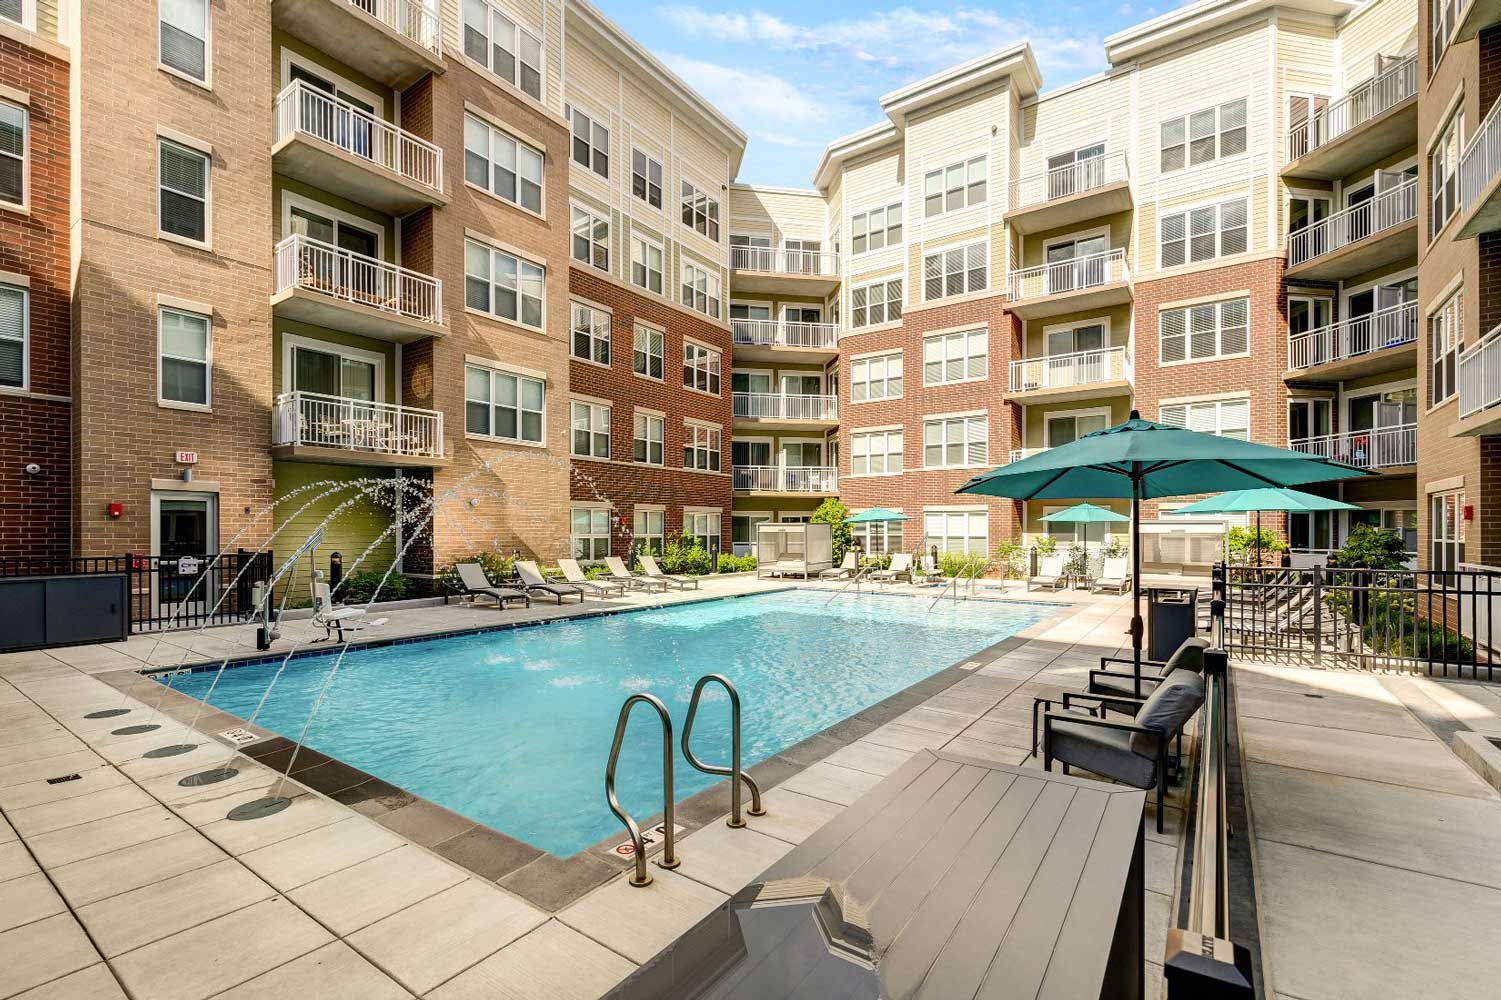  Luxurious Pool with Cabanas at Buckingham Place Apartments in Des Plaines, Illinois